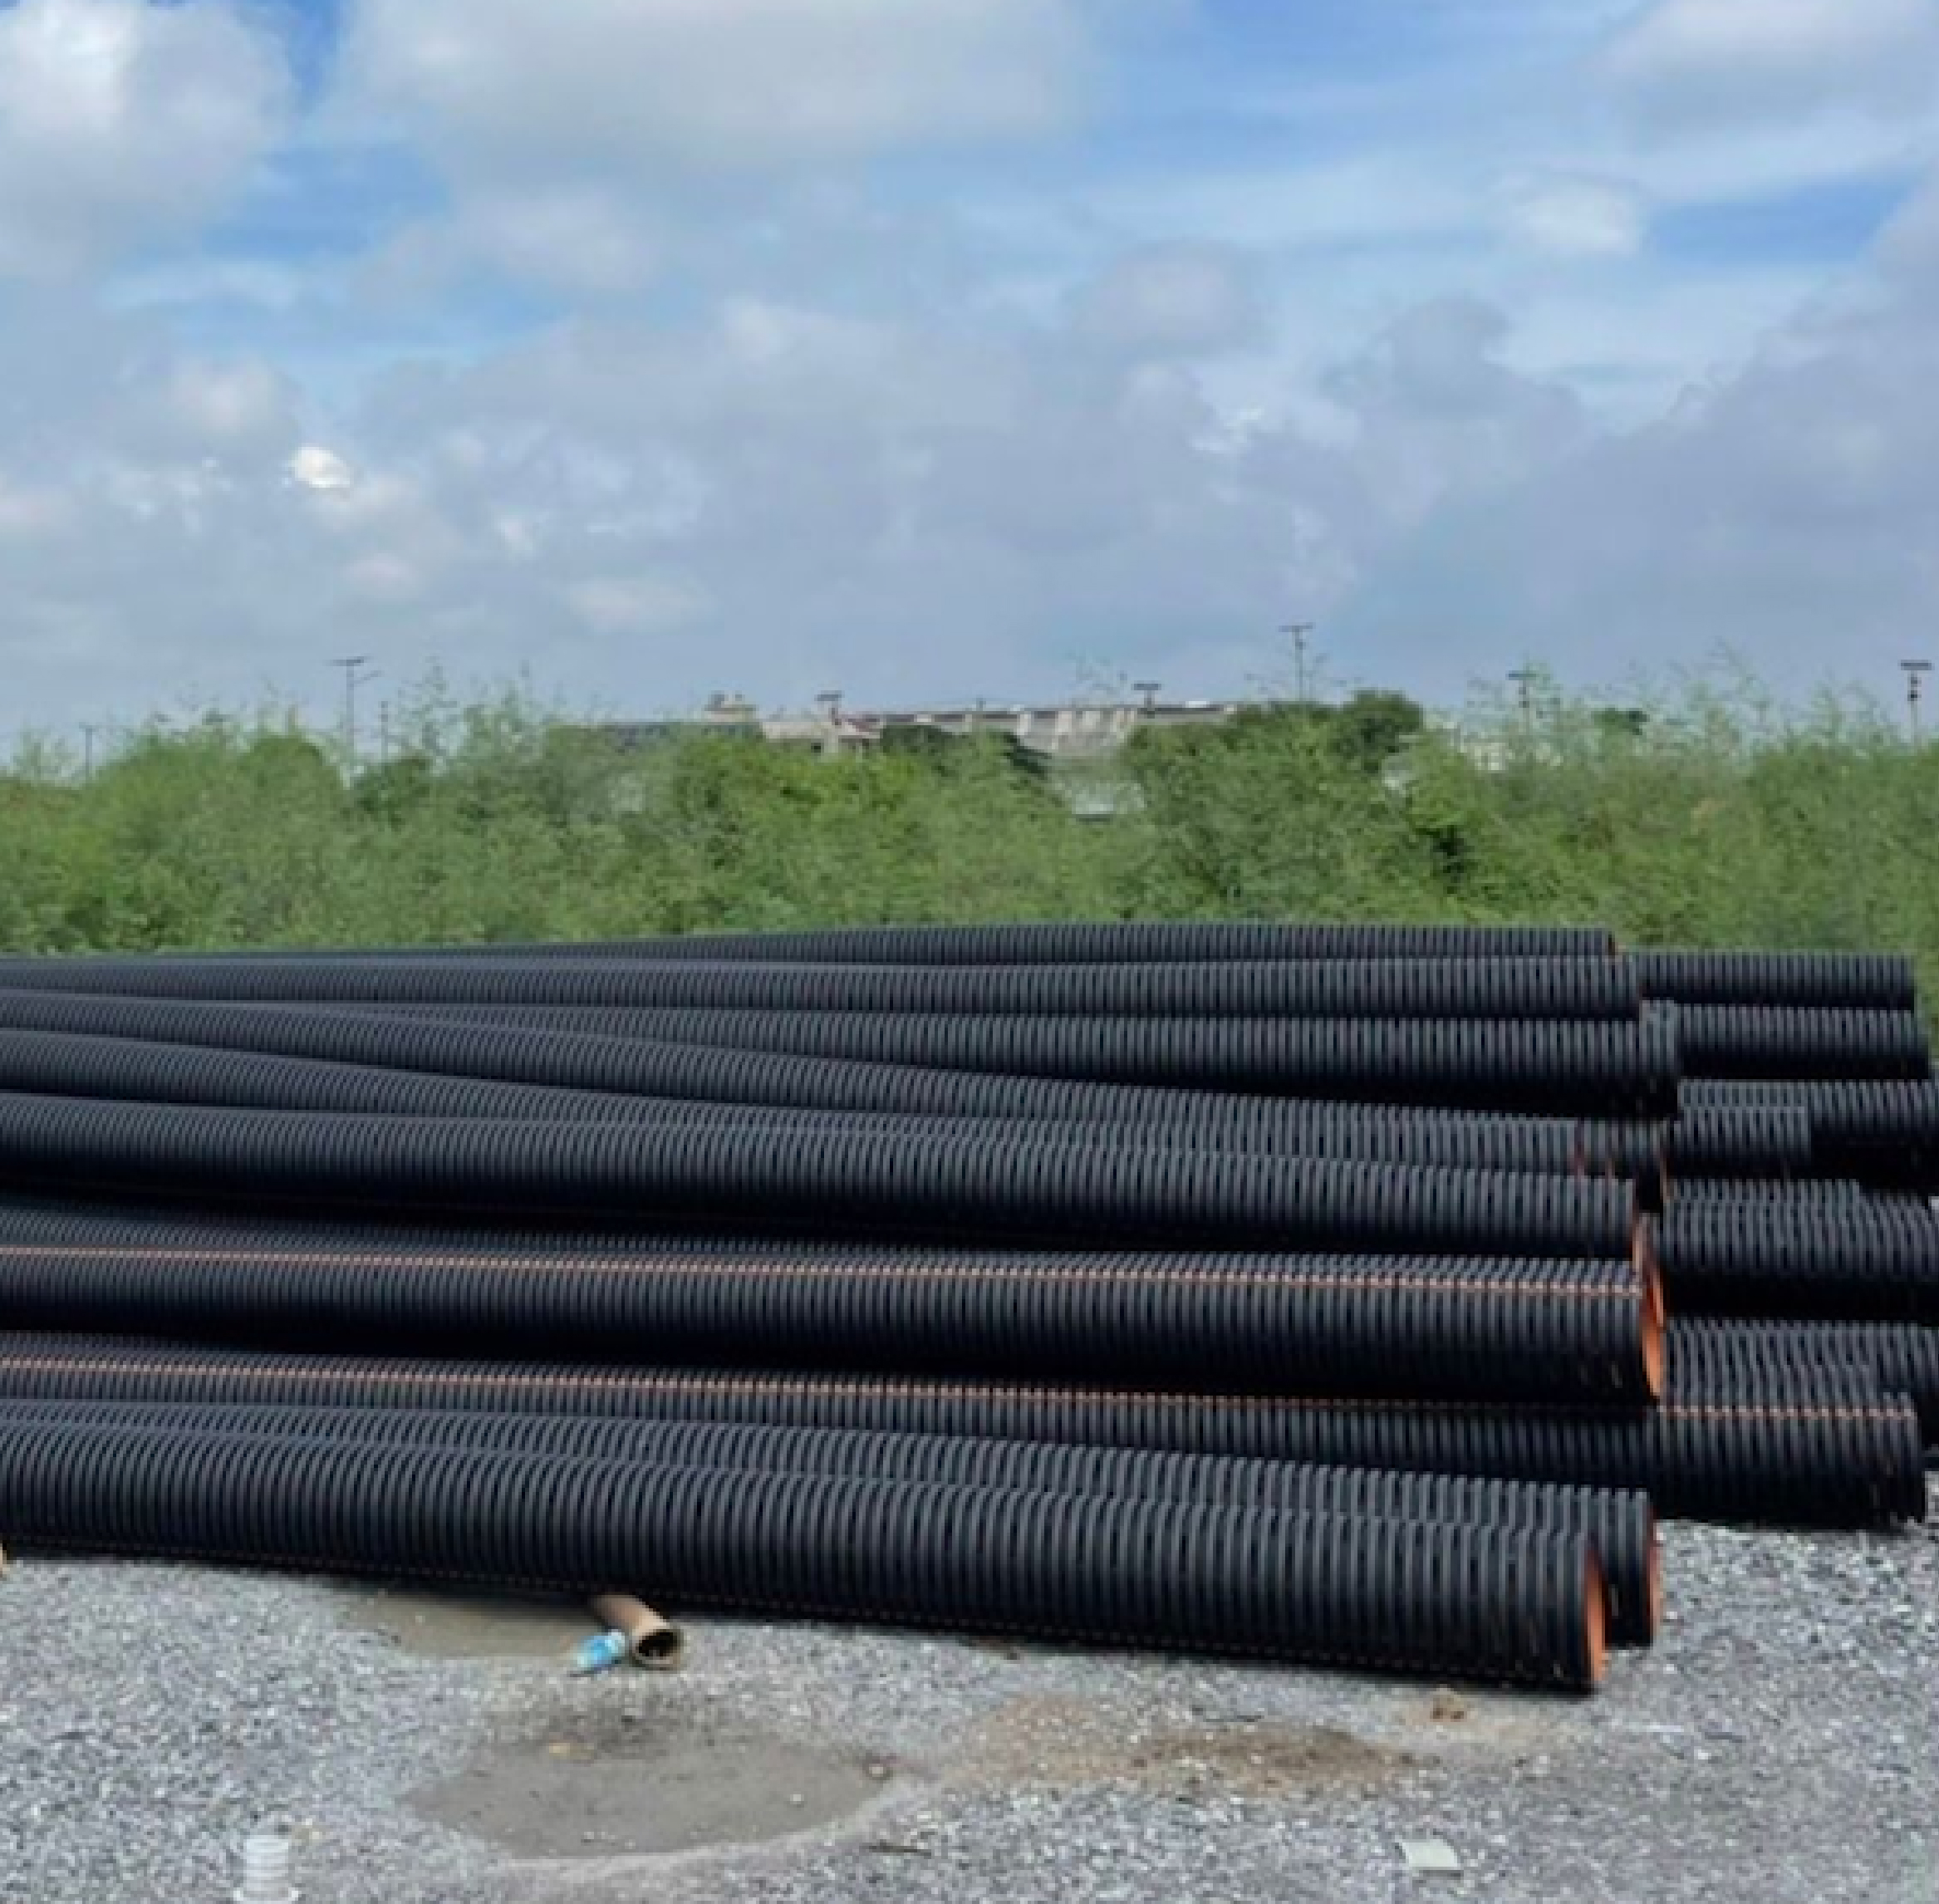 A coiled, flexible HDPE pipe used for versatile plumbing and irrigation applications